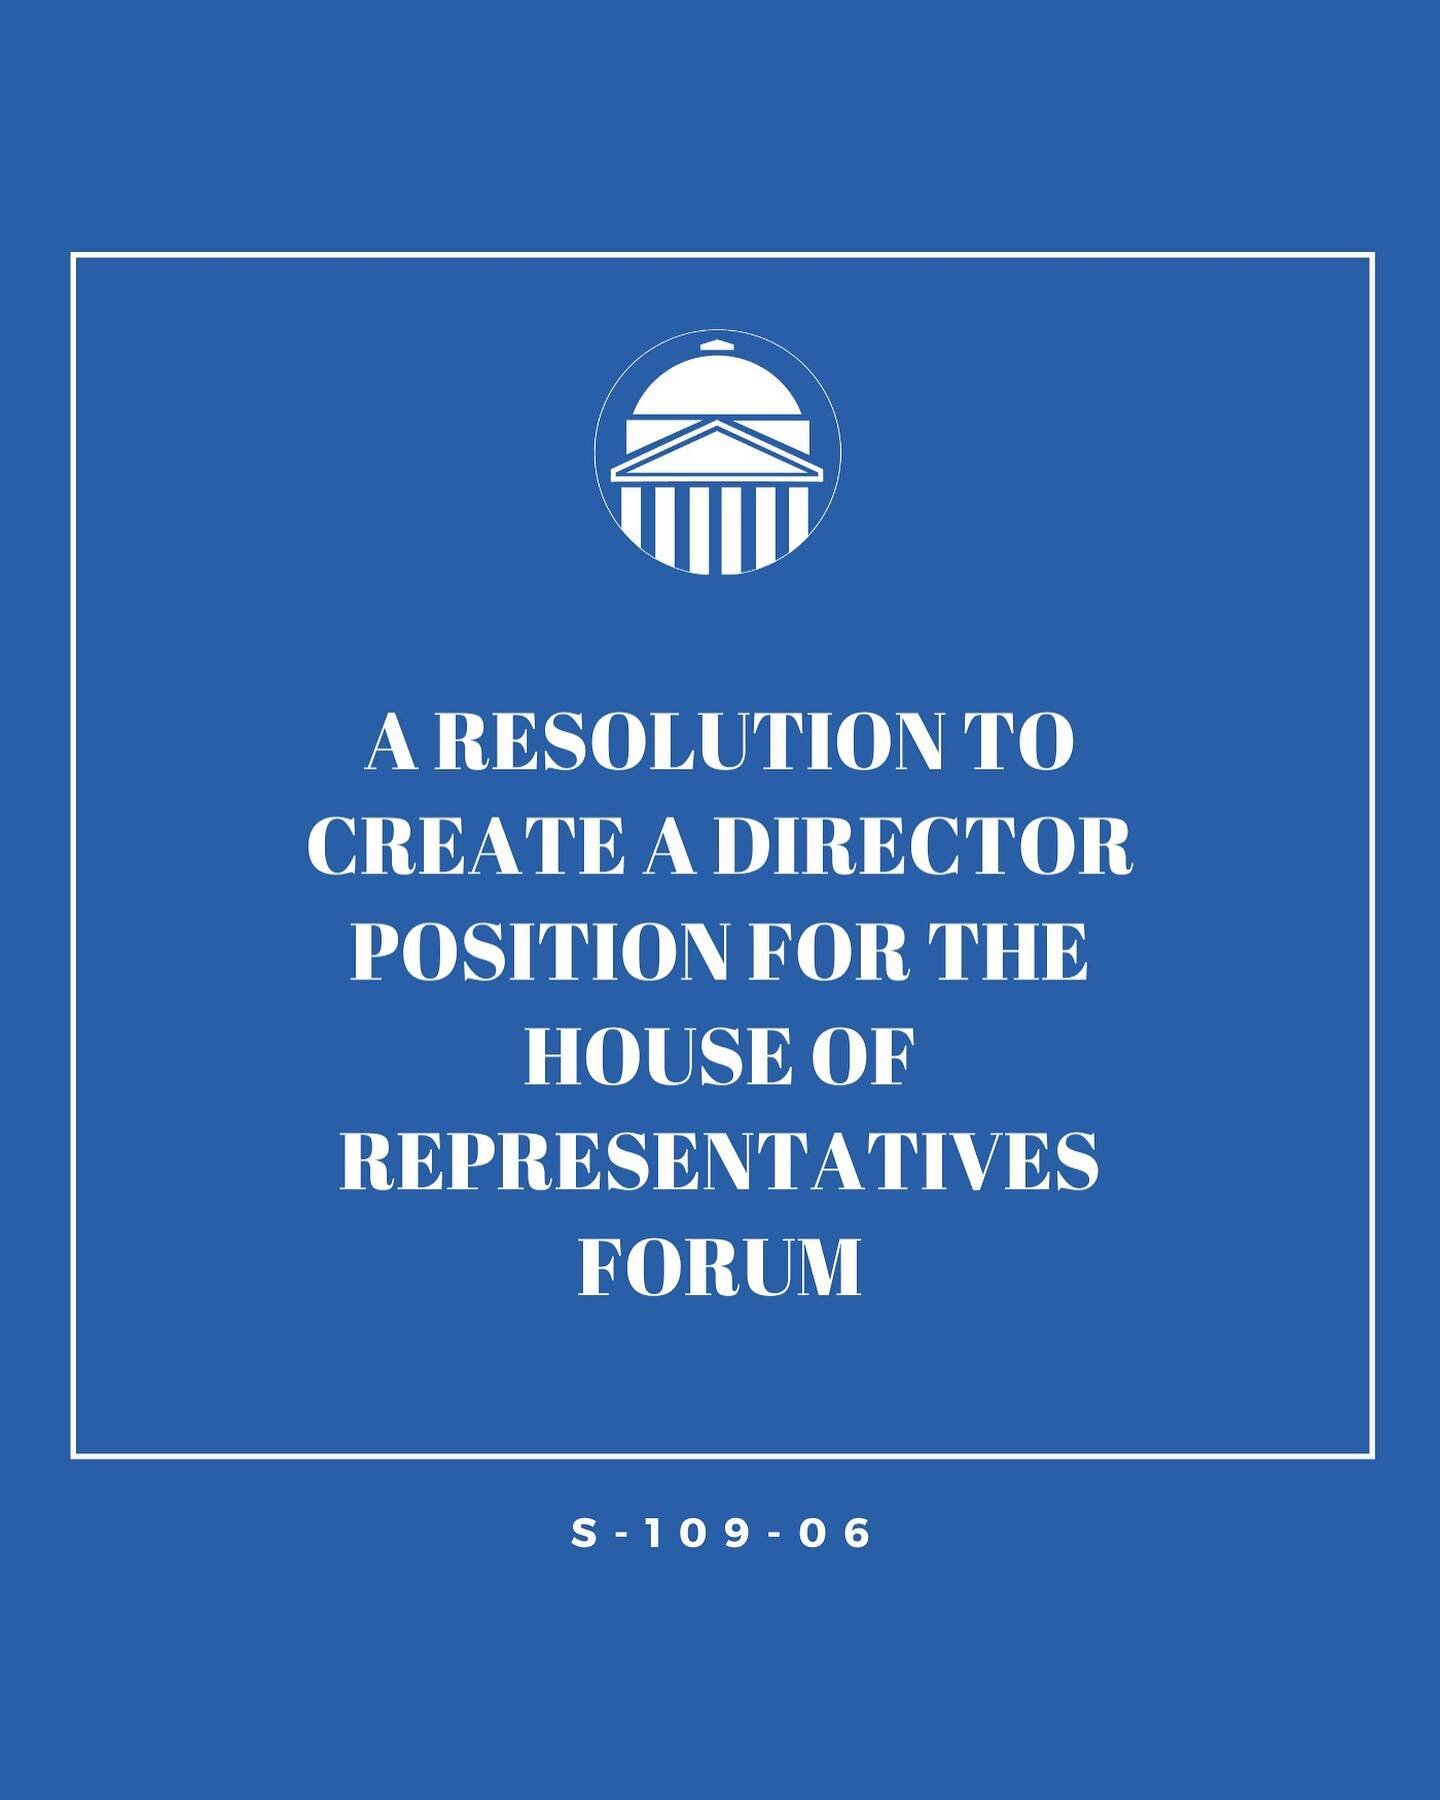 NEW LEGISLATION! A Resolution to Create a Director Position for the House of Representatives Forum